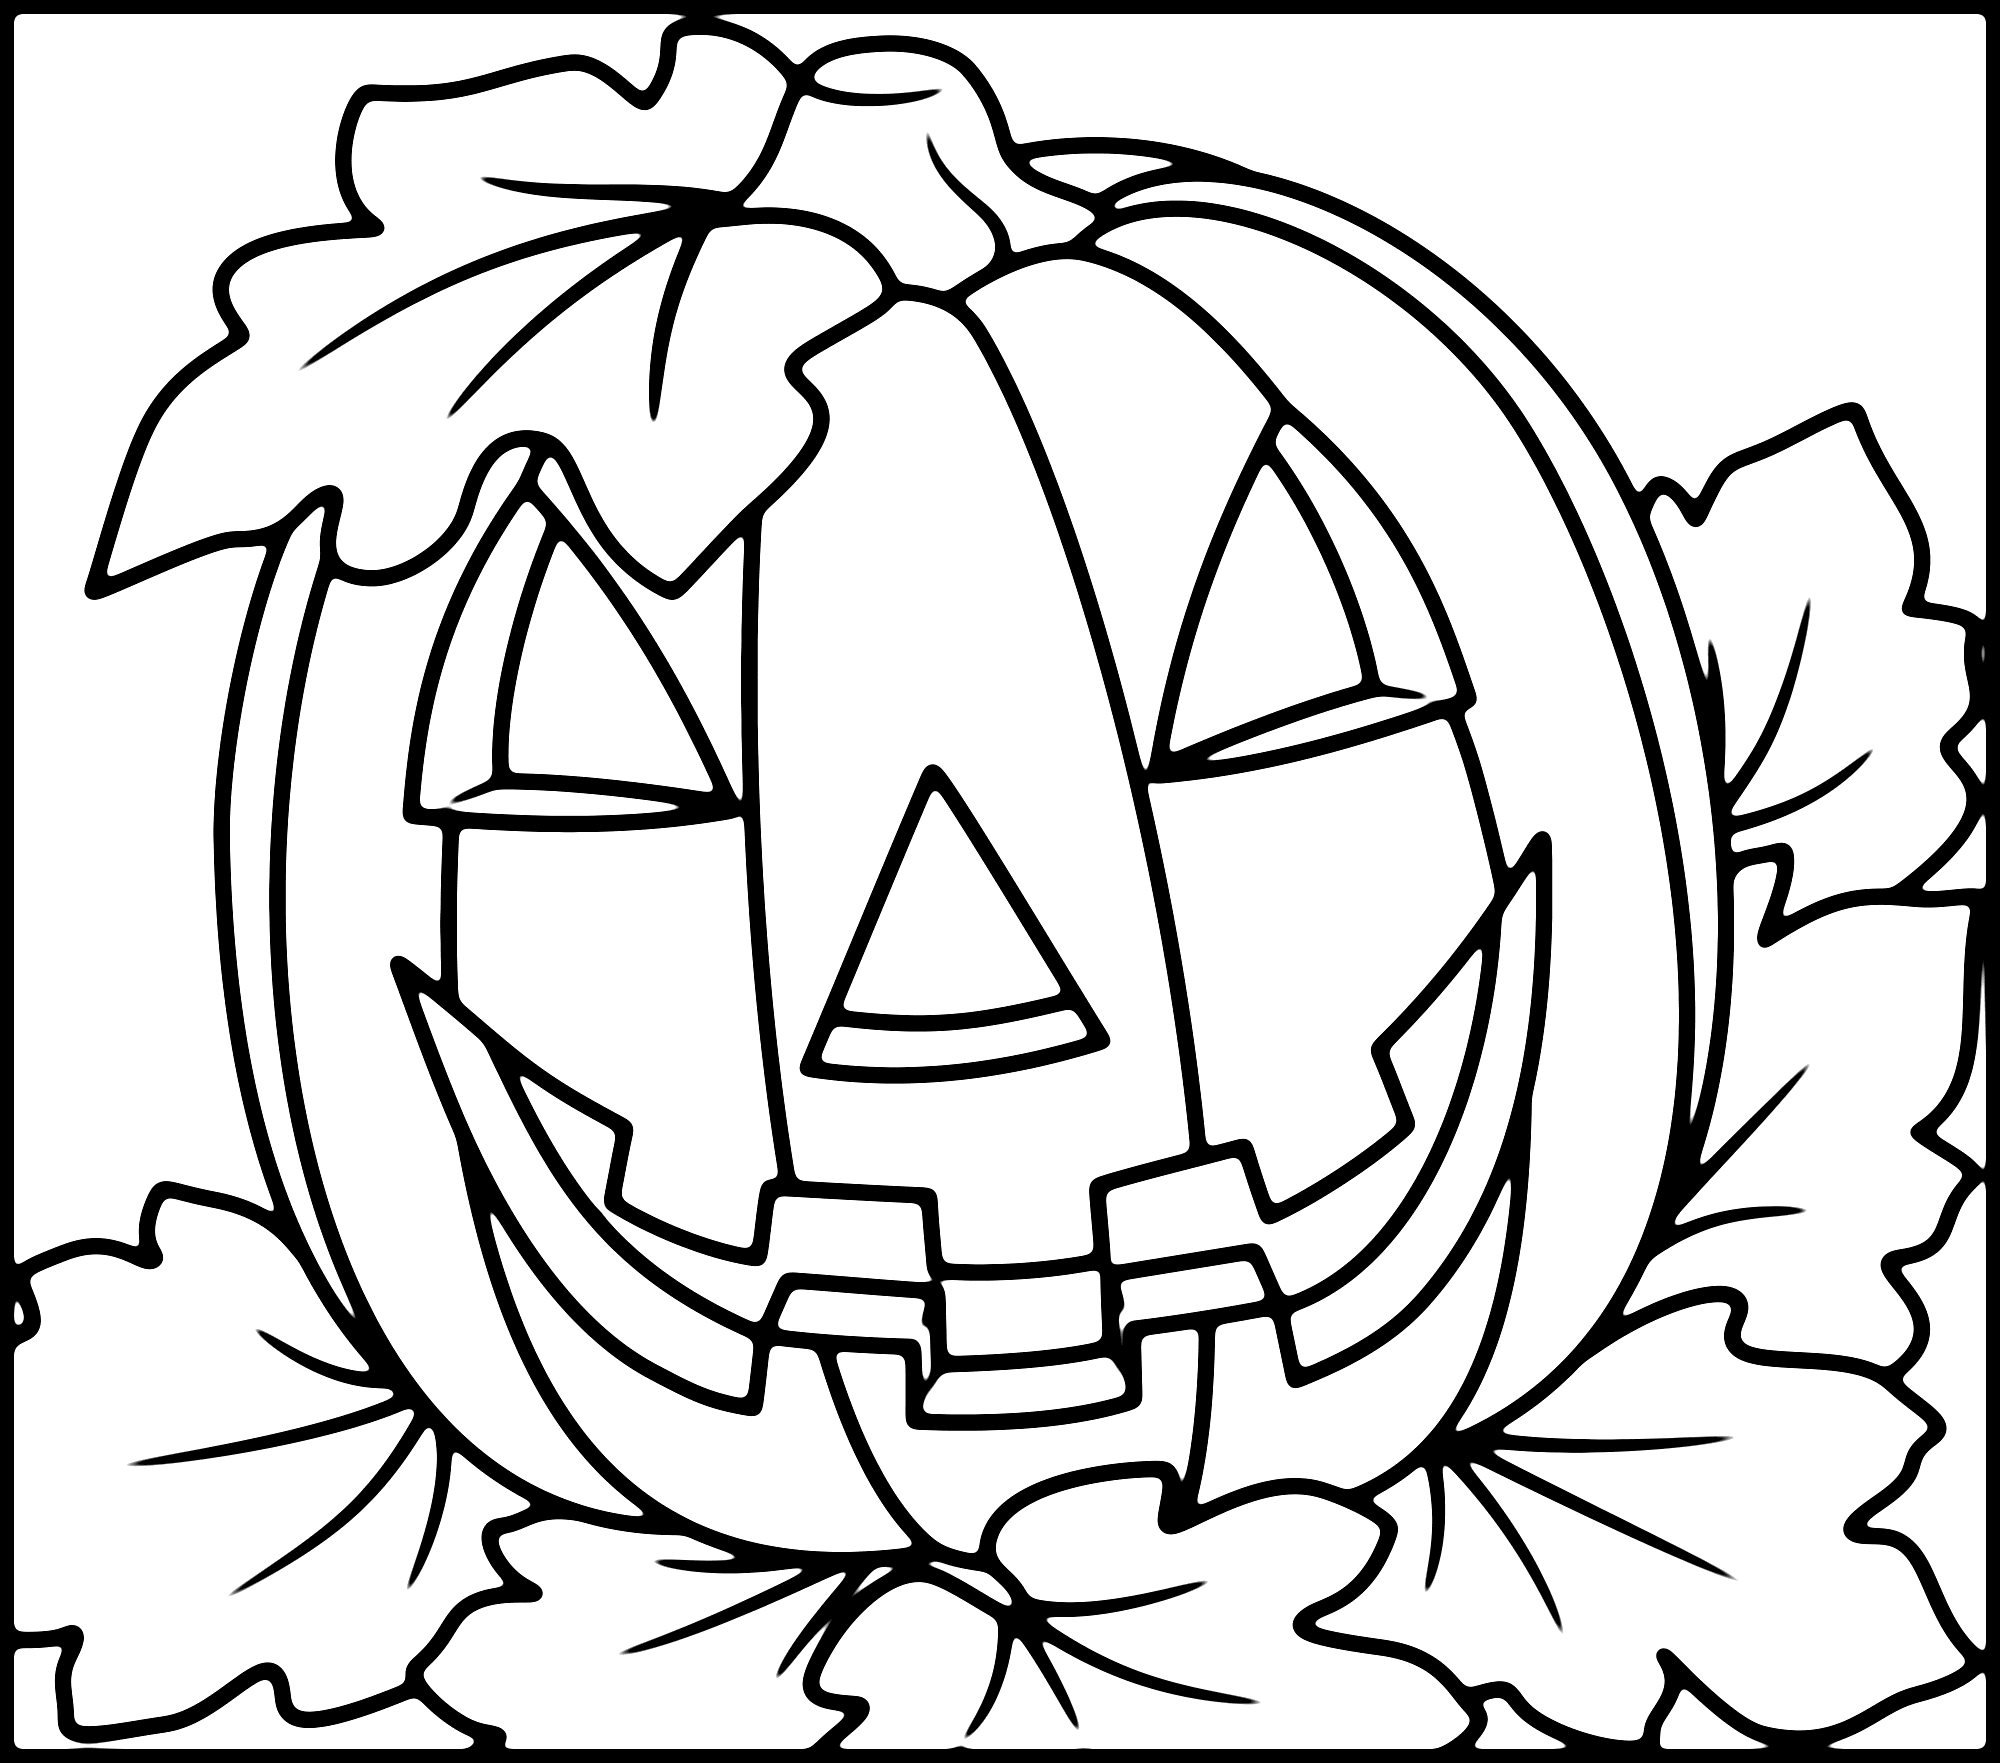 Spooky & Cute Halloween Coloring Pages: Kids & Adults » Printcolorcraft